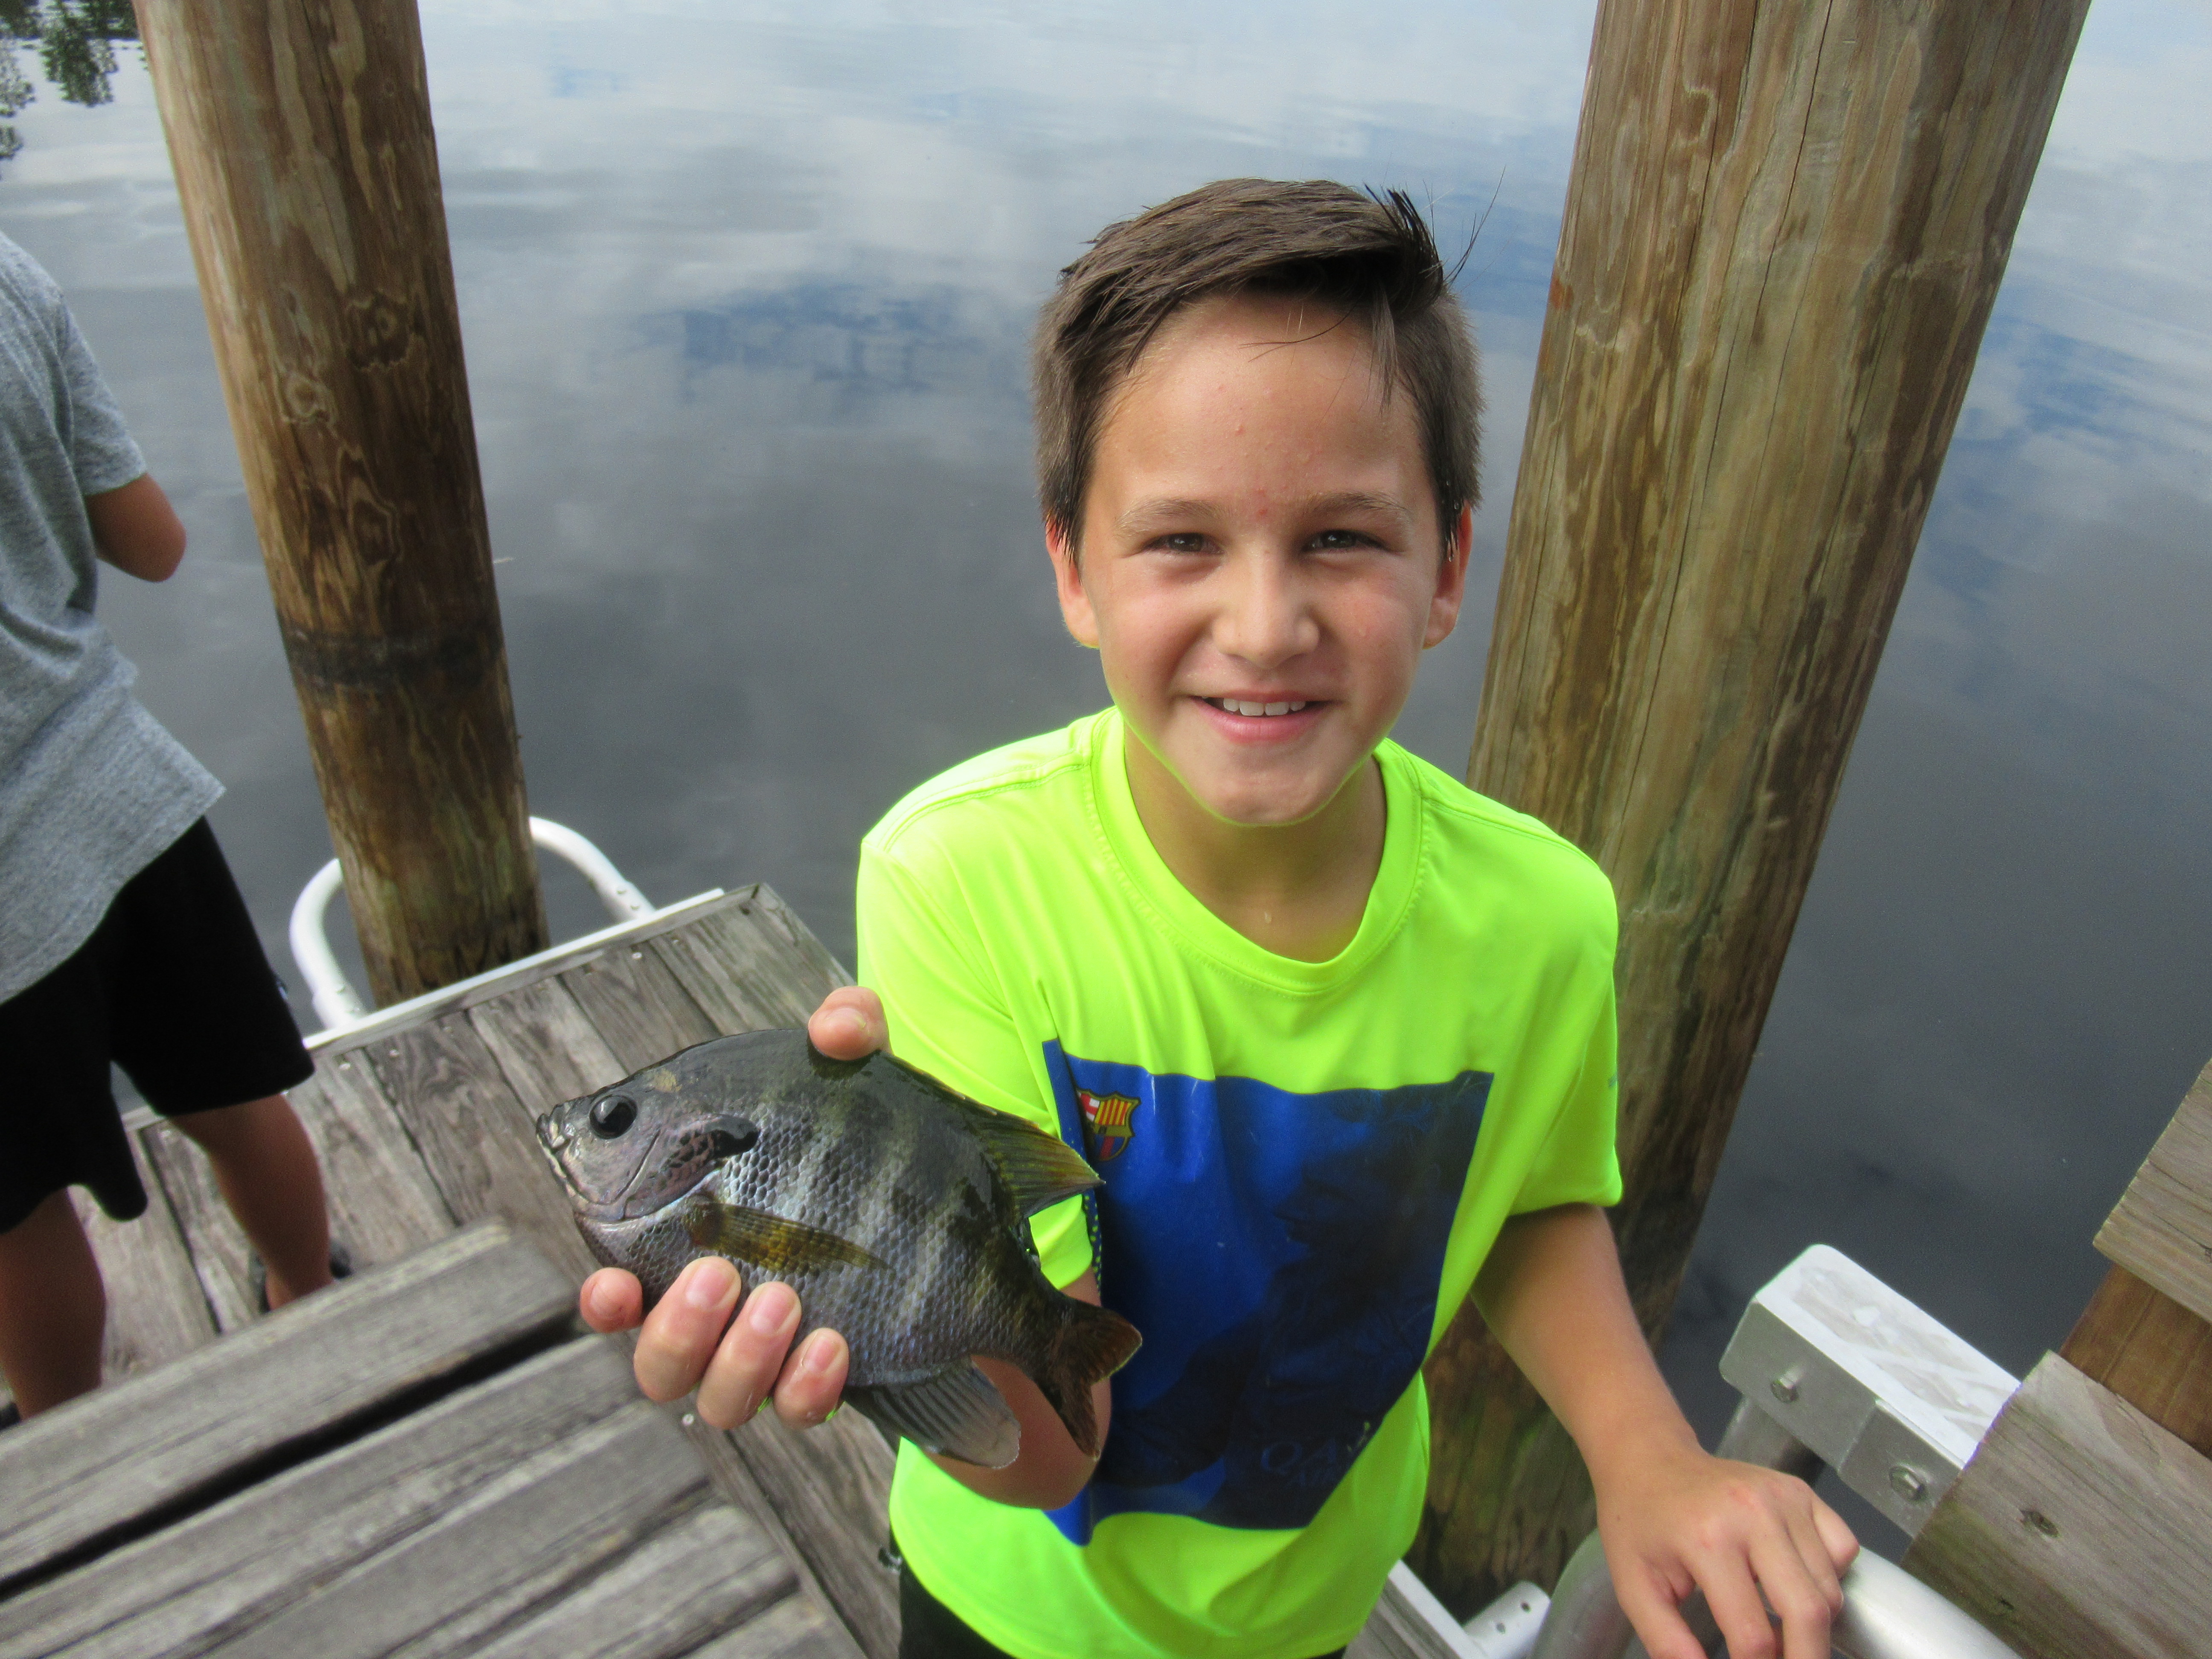 Child on a dock holding a small fish he caught